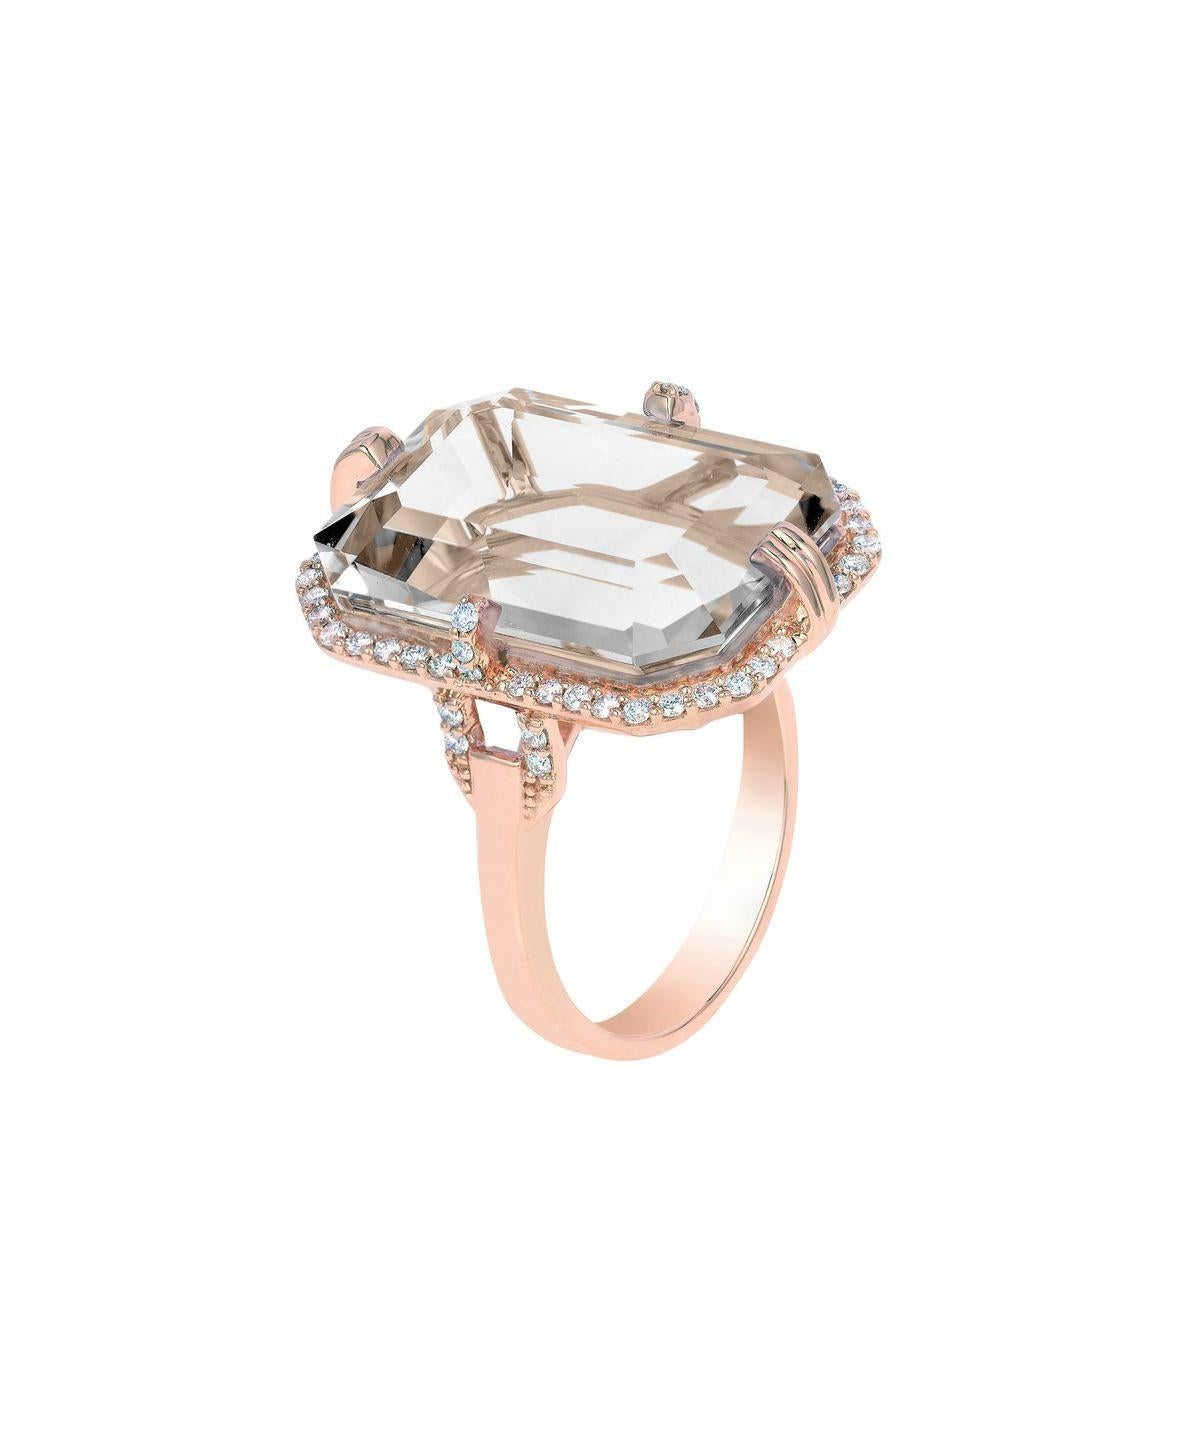 Rock Crystal Emerald Cut Ring with Diamonds in 18K Pink Gold, From 'Gossip' Collection

Stone Size: 20 x 14 mm 

Gemstone Approx Wt: Rock Crystal- 17.38 Carats

Diamonds: G-H / VS, Approx Wt: 0.41 Carats